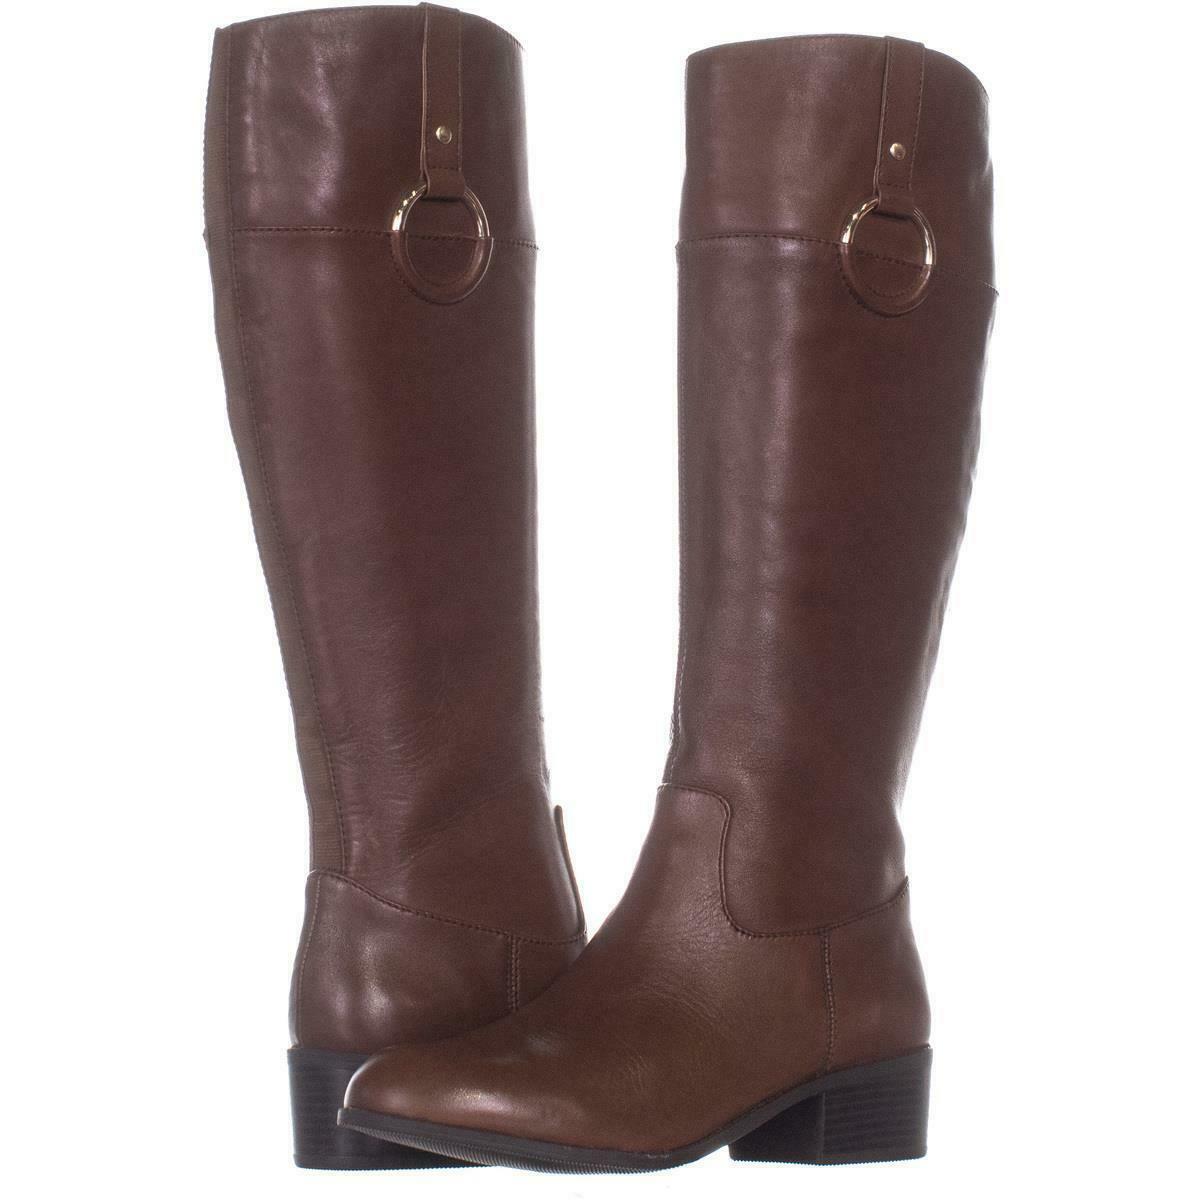 A35 Briaah Under the Knee Side Zip Up Boots 666, Cognac, 10 US - Boots